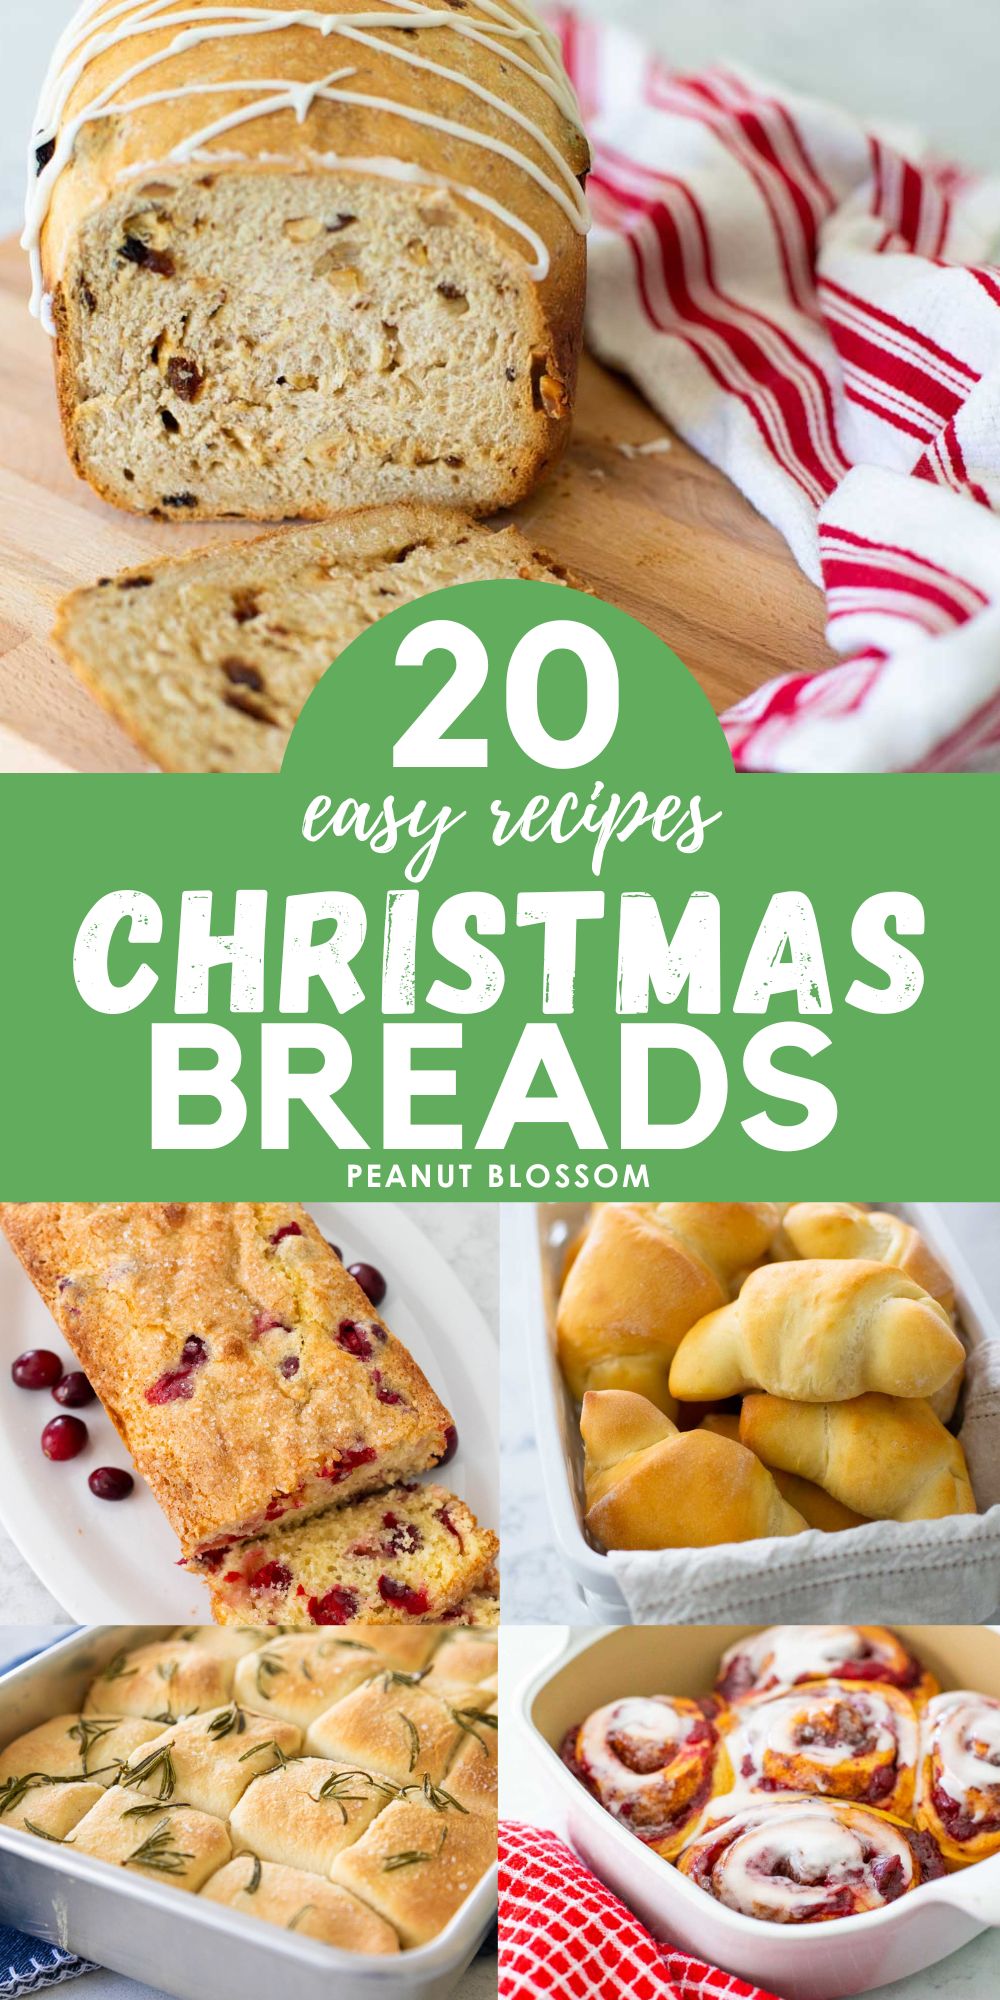 The photo collage shows 5 sweet or savory Christmas bread recipes to serve for the holiday.